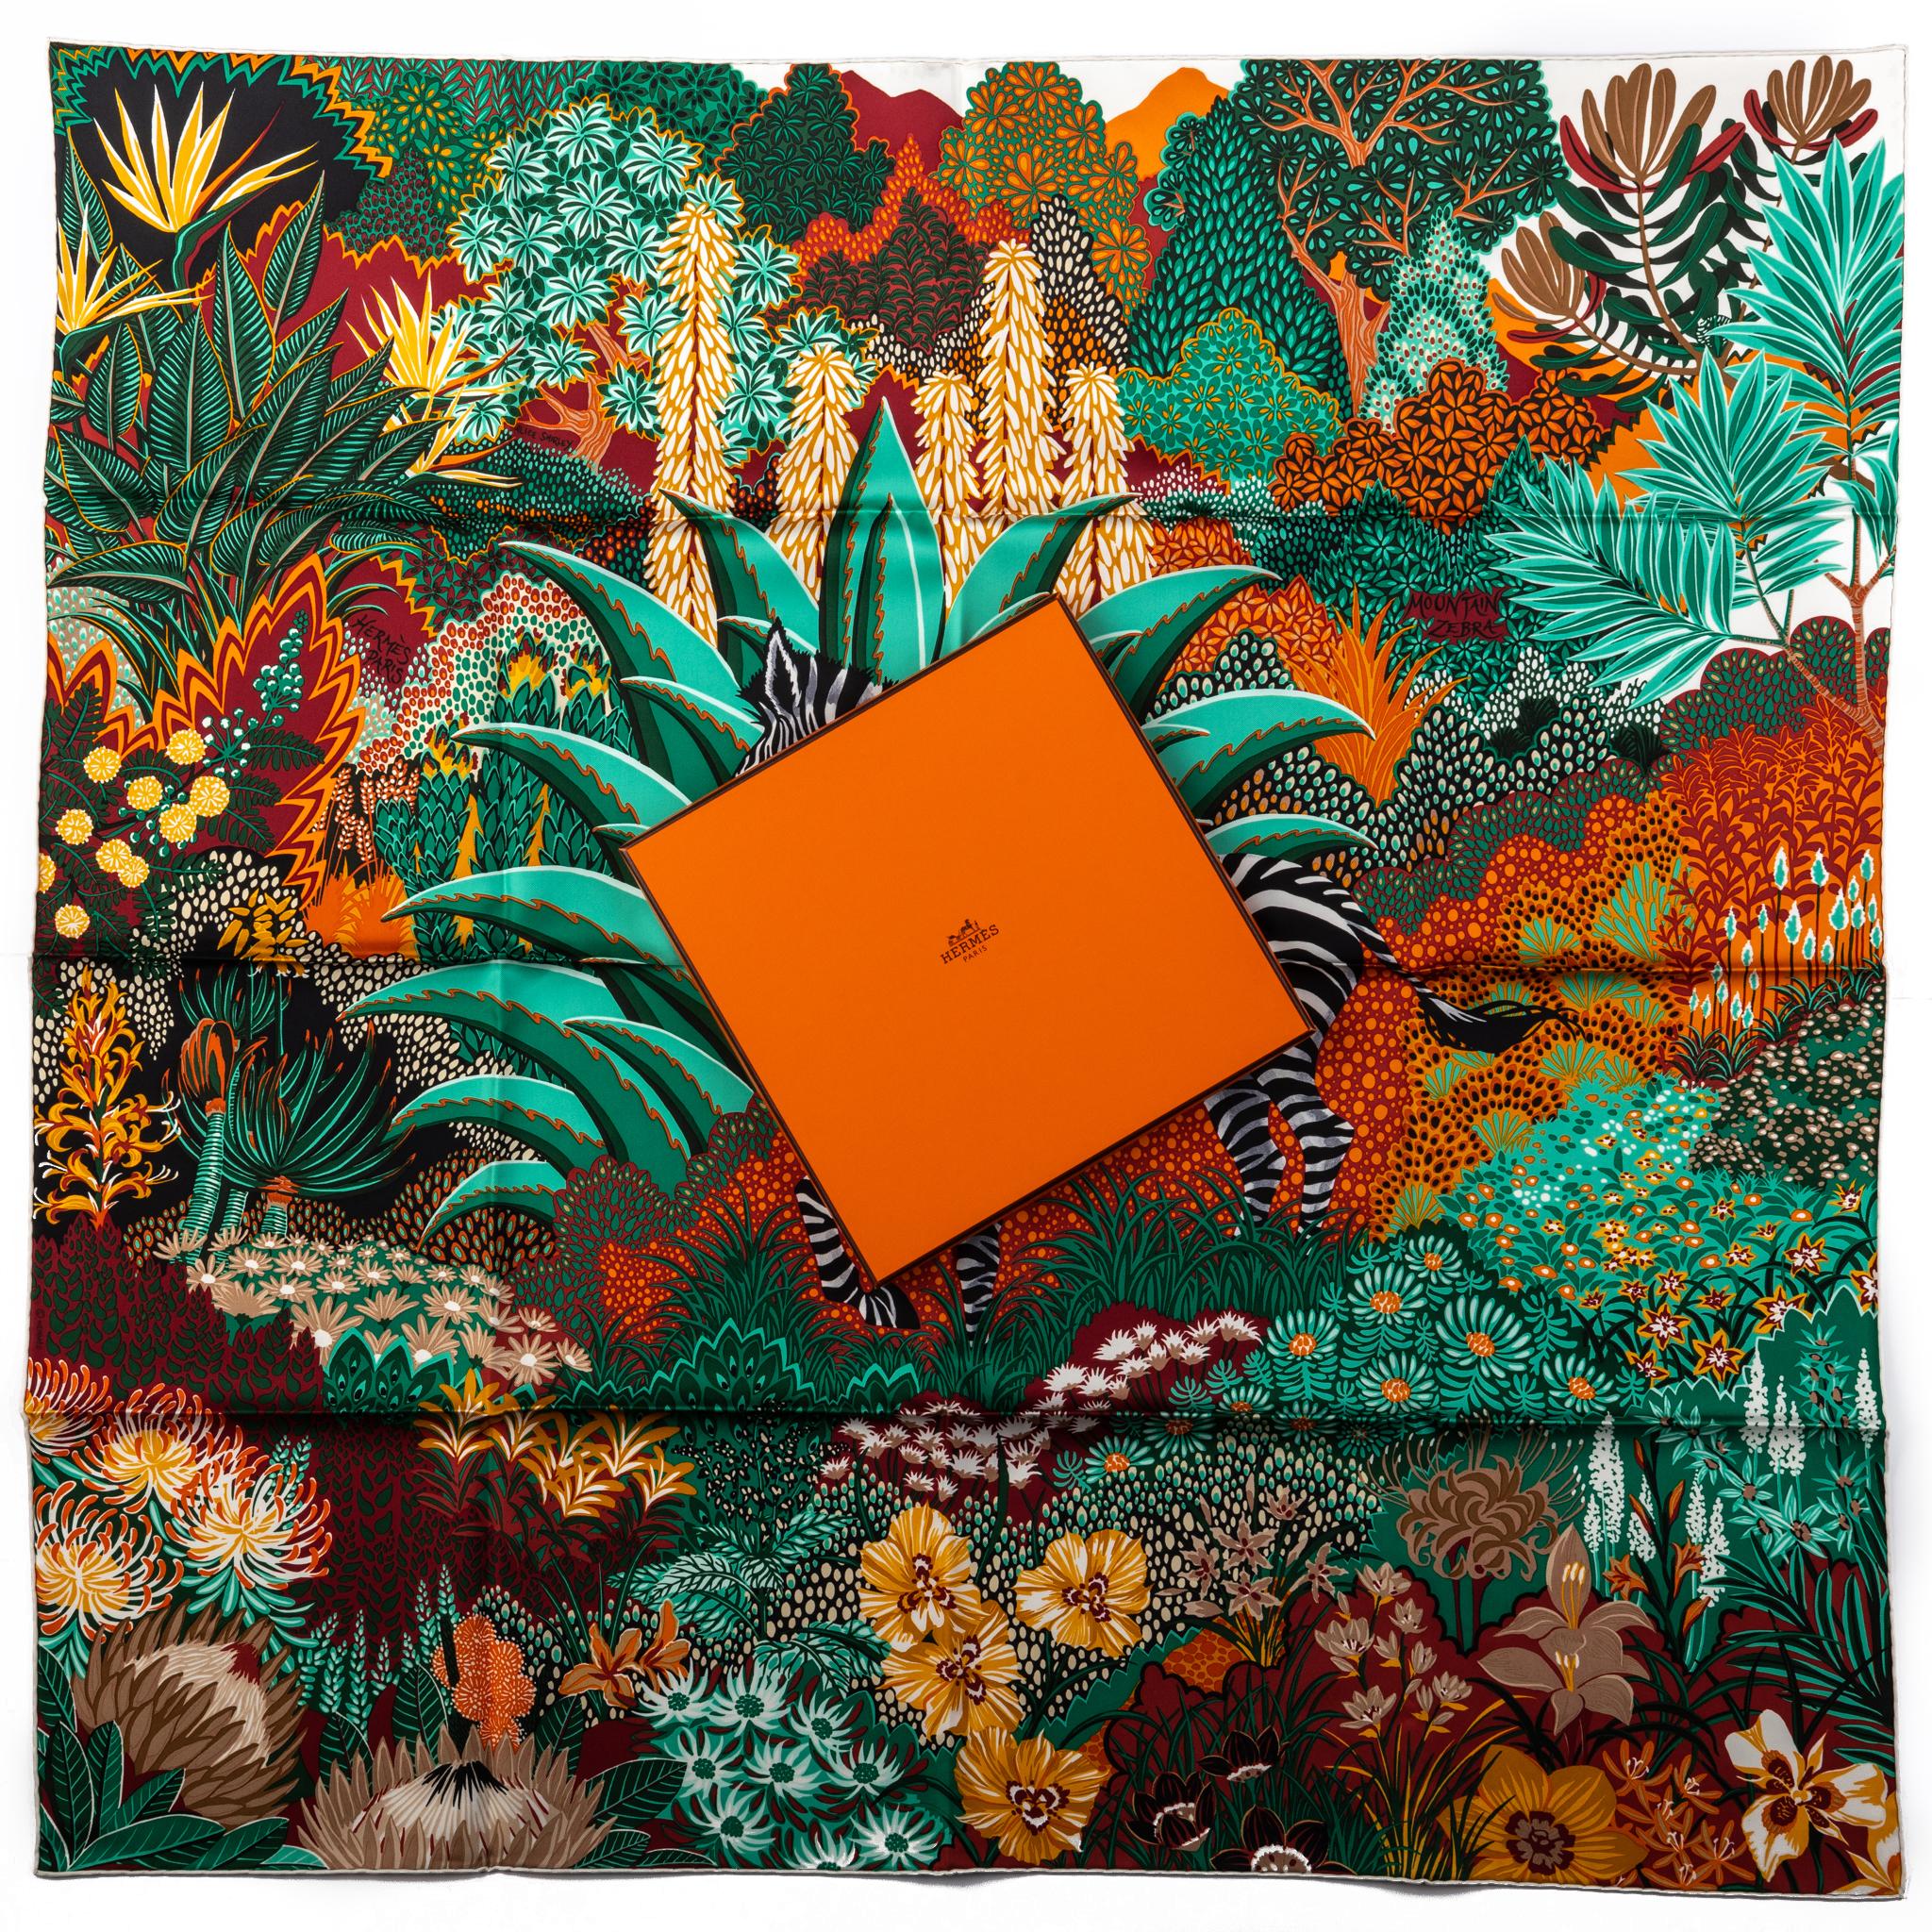 Hermès collectible silk tropical zebra orange and green. Hand-rolled edges. New in box.